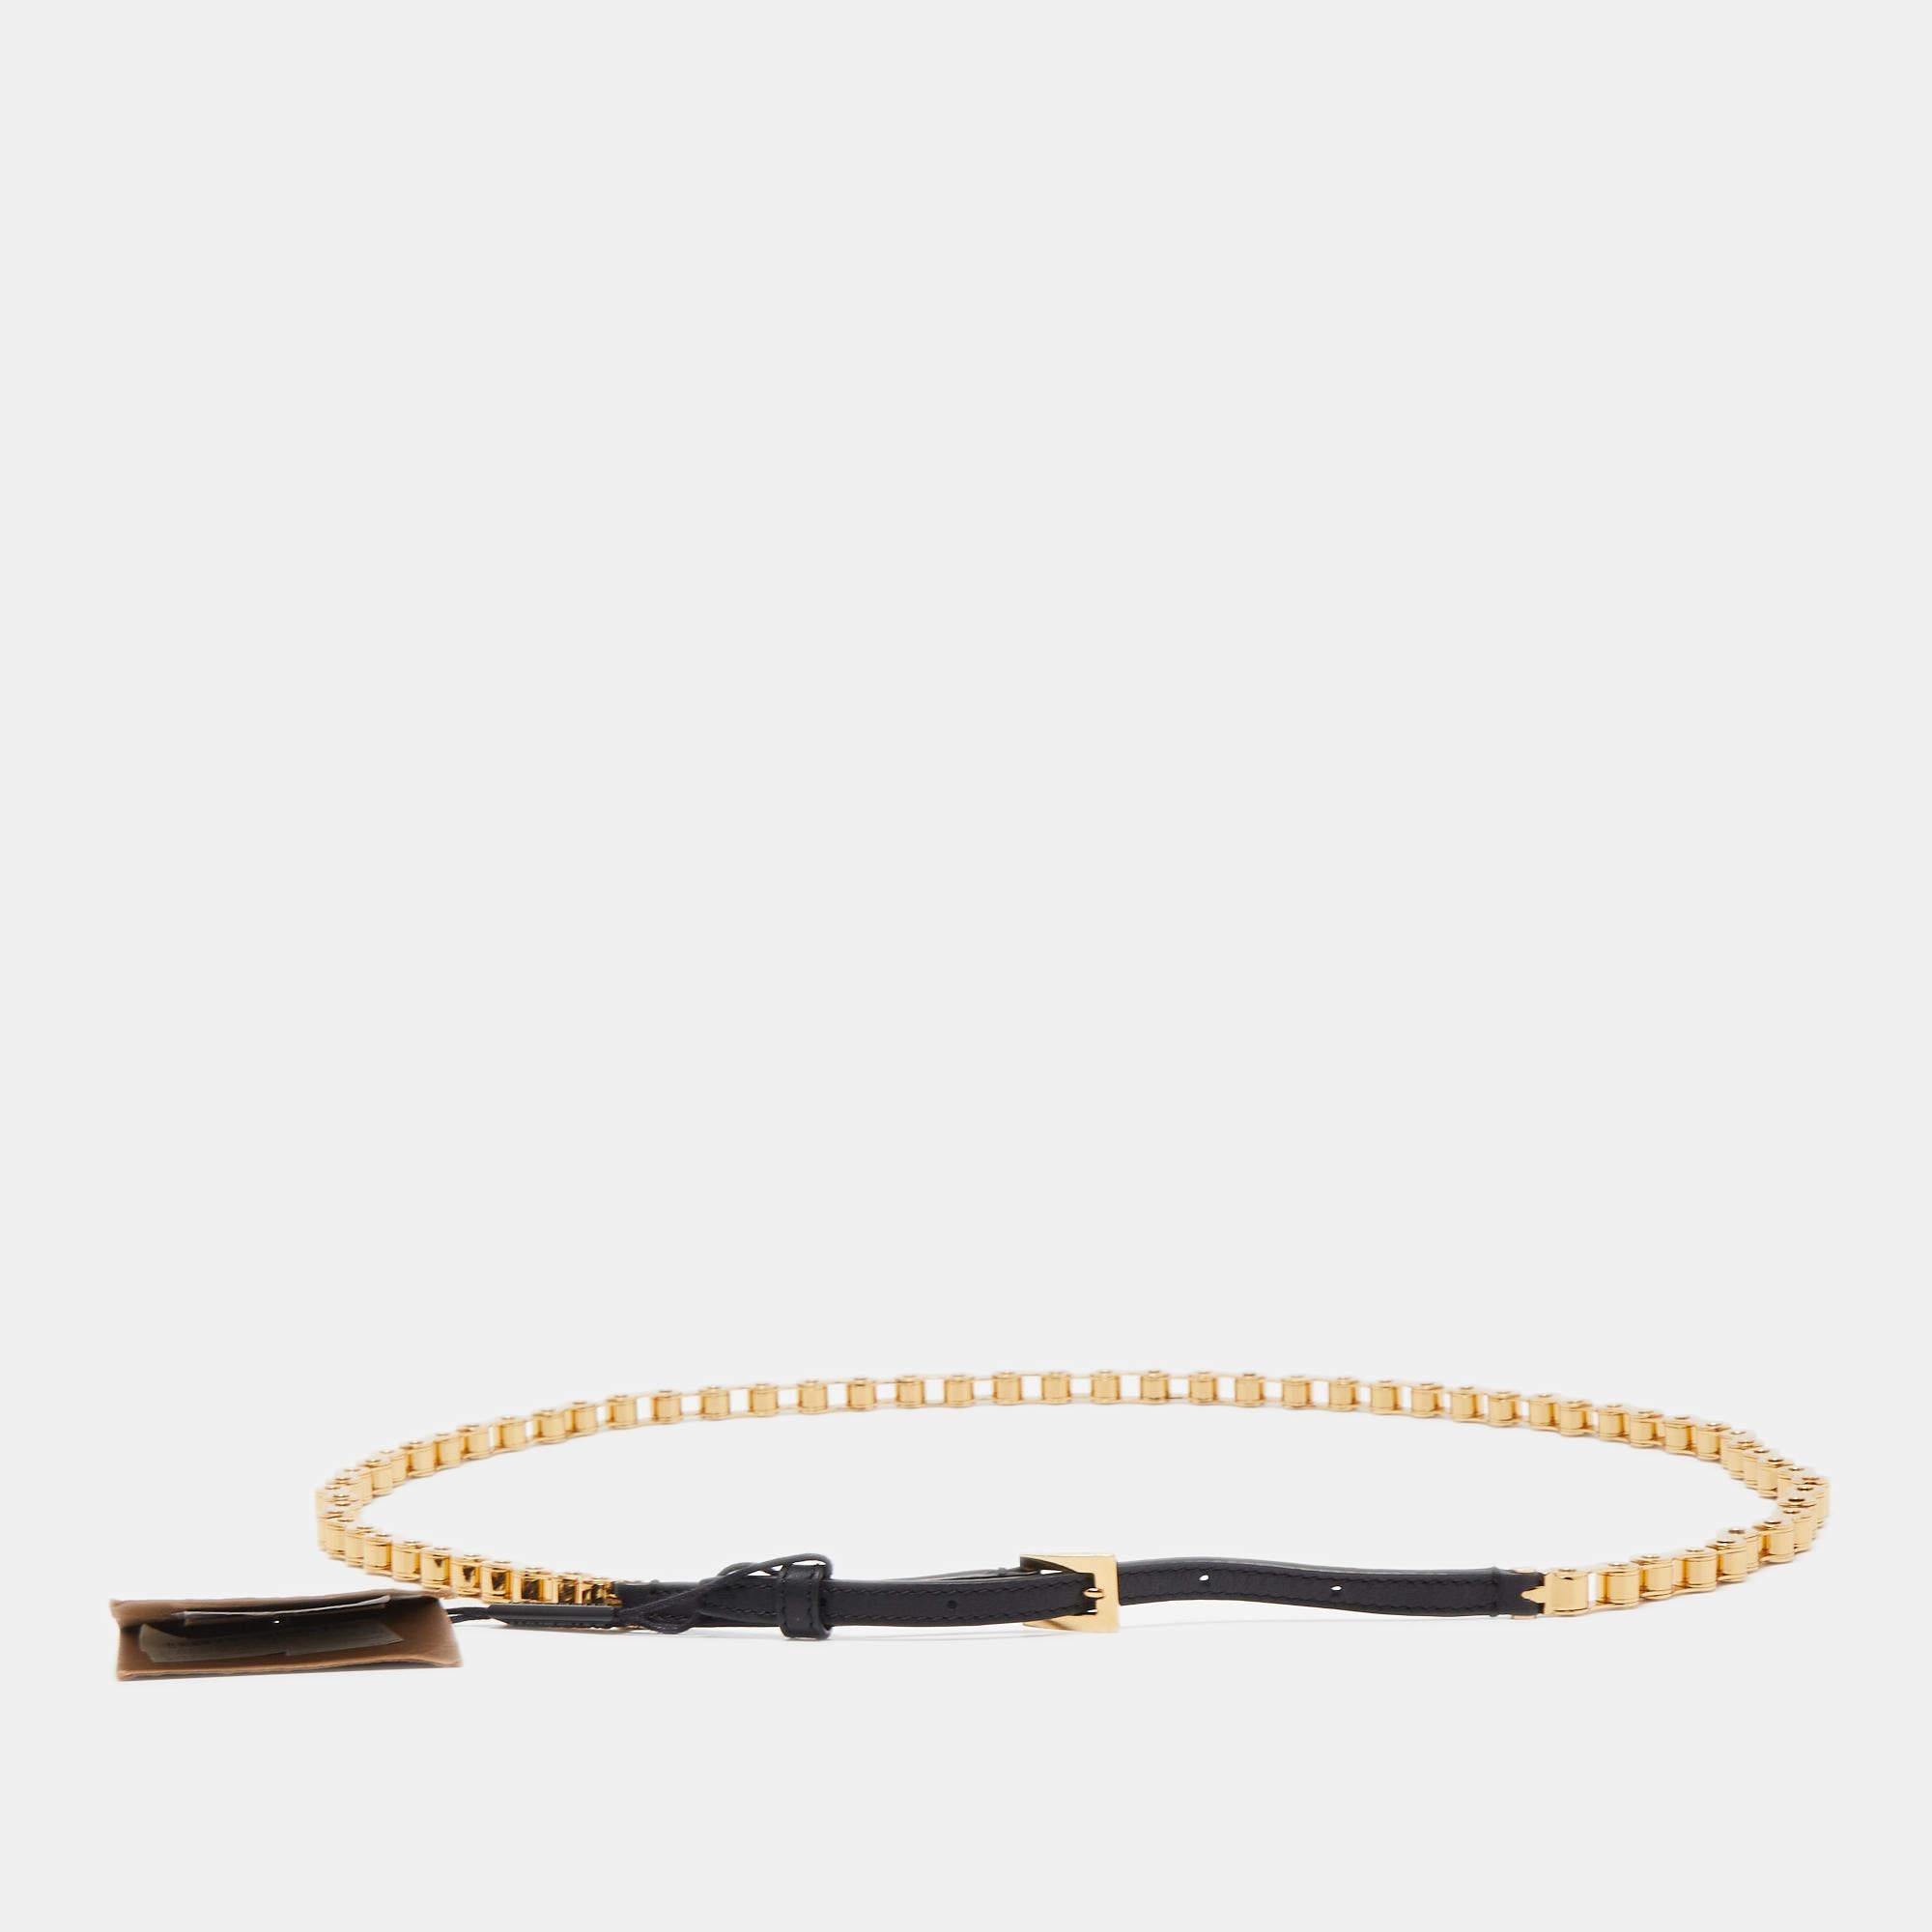 Burberry presents this bracelet for fashionable-thinking women. Made from leather, its bike-chain design is complemented with gold-plated metal.

Includes: Original Dustbag, Price Tag

